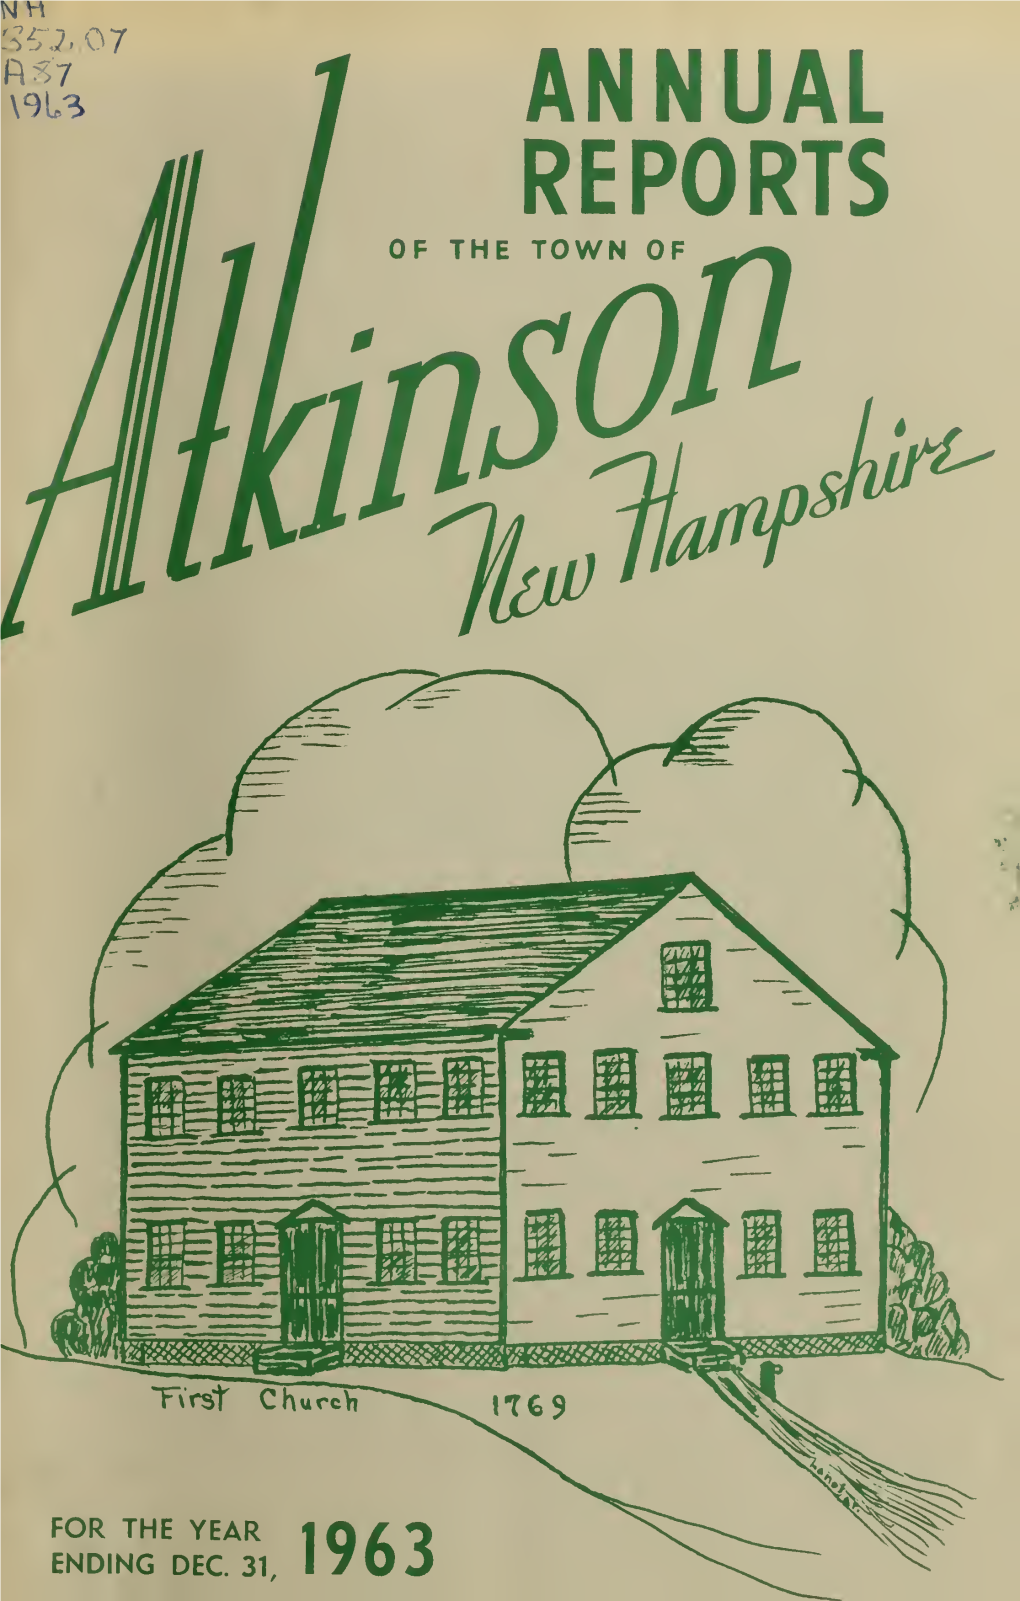 Annual Report of the Town of Atkinson, N.H. for the Year Ending December